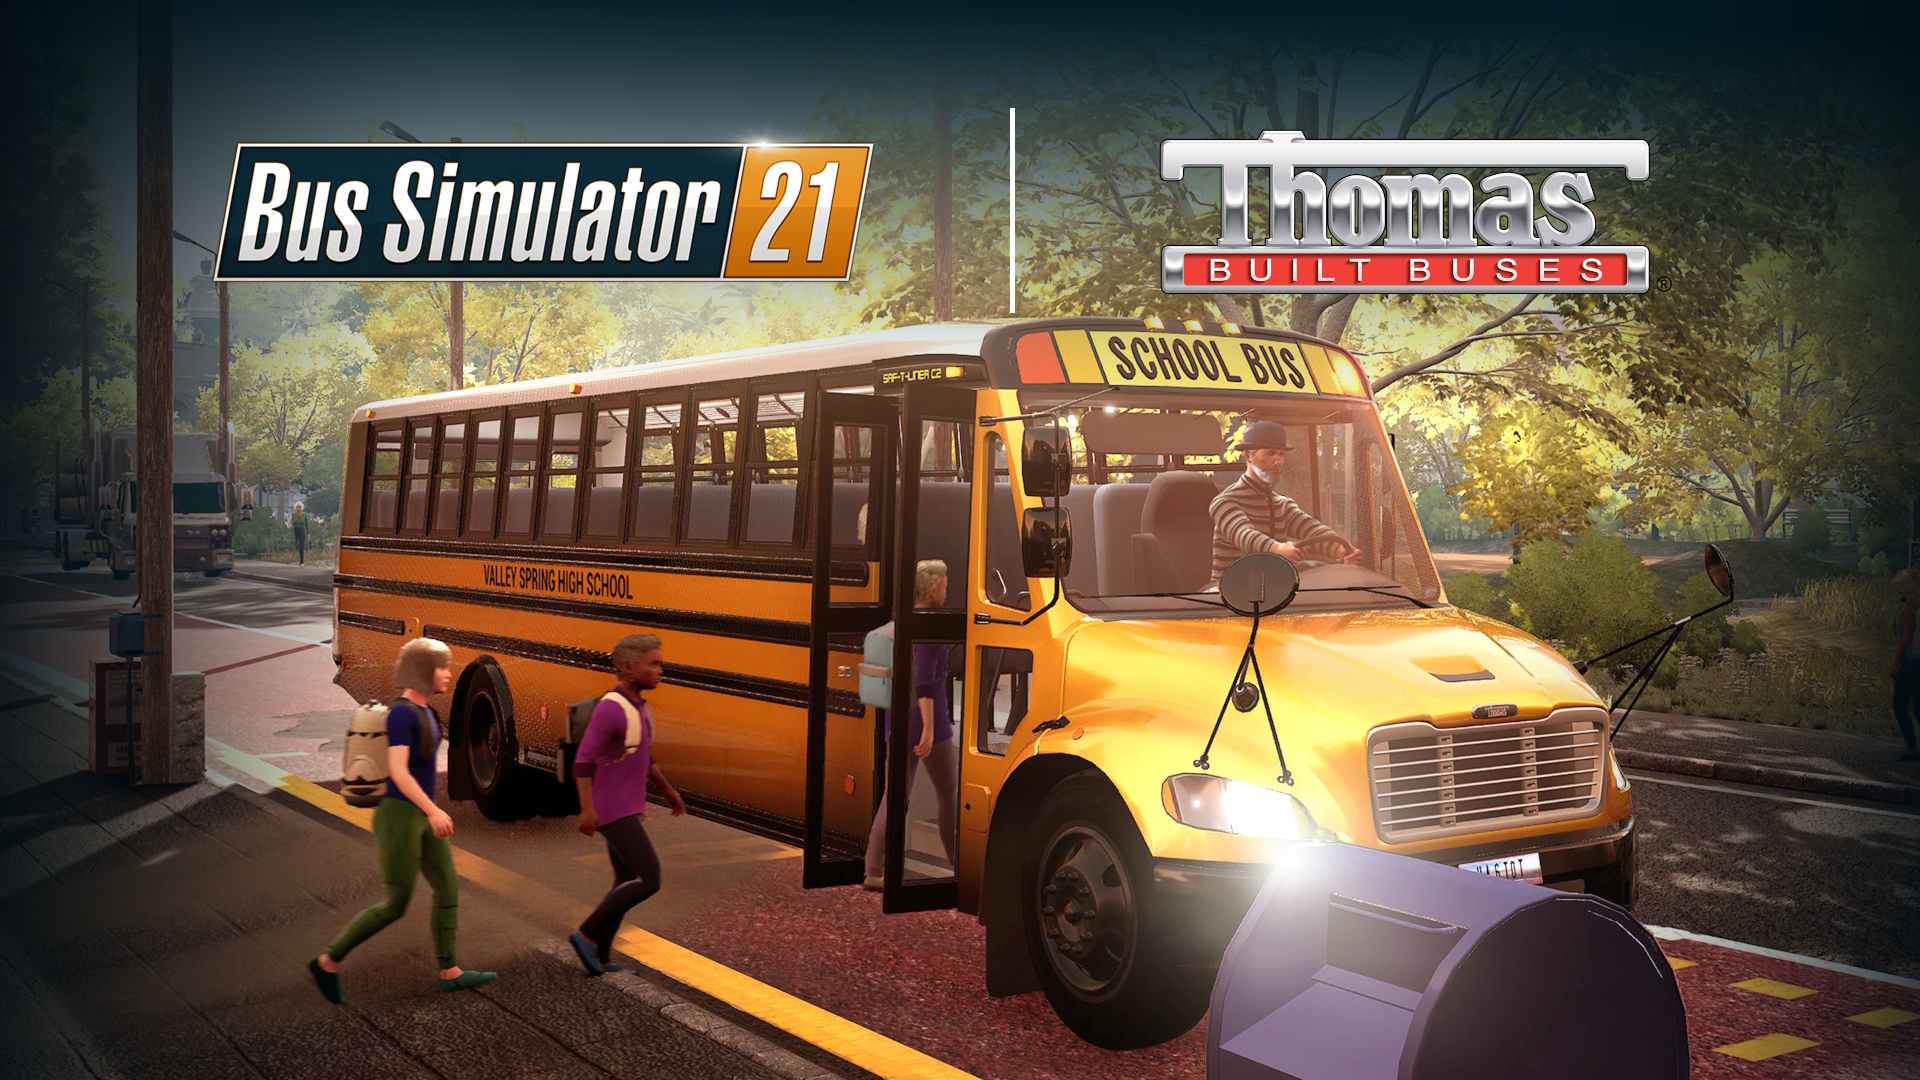 Stop an game! the Thomas bus Built additional for school Bus Next 21 Pack Bus introduces - Buses® Simulator